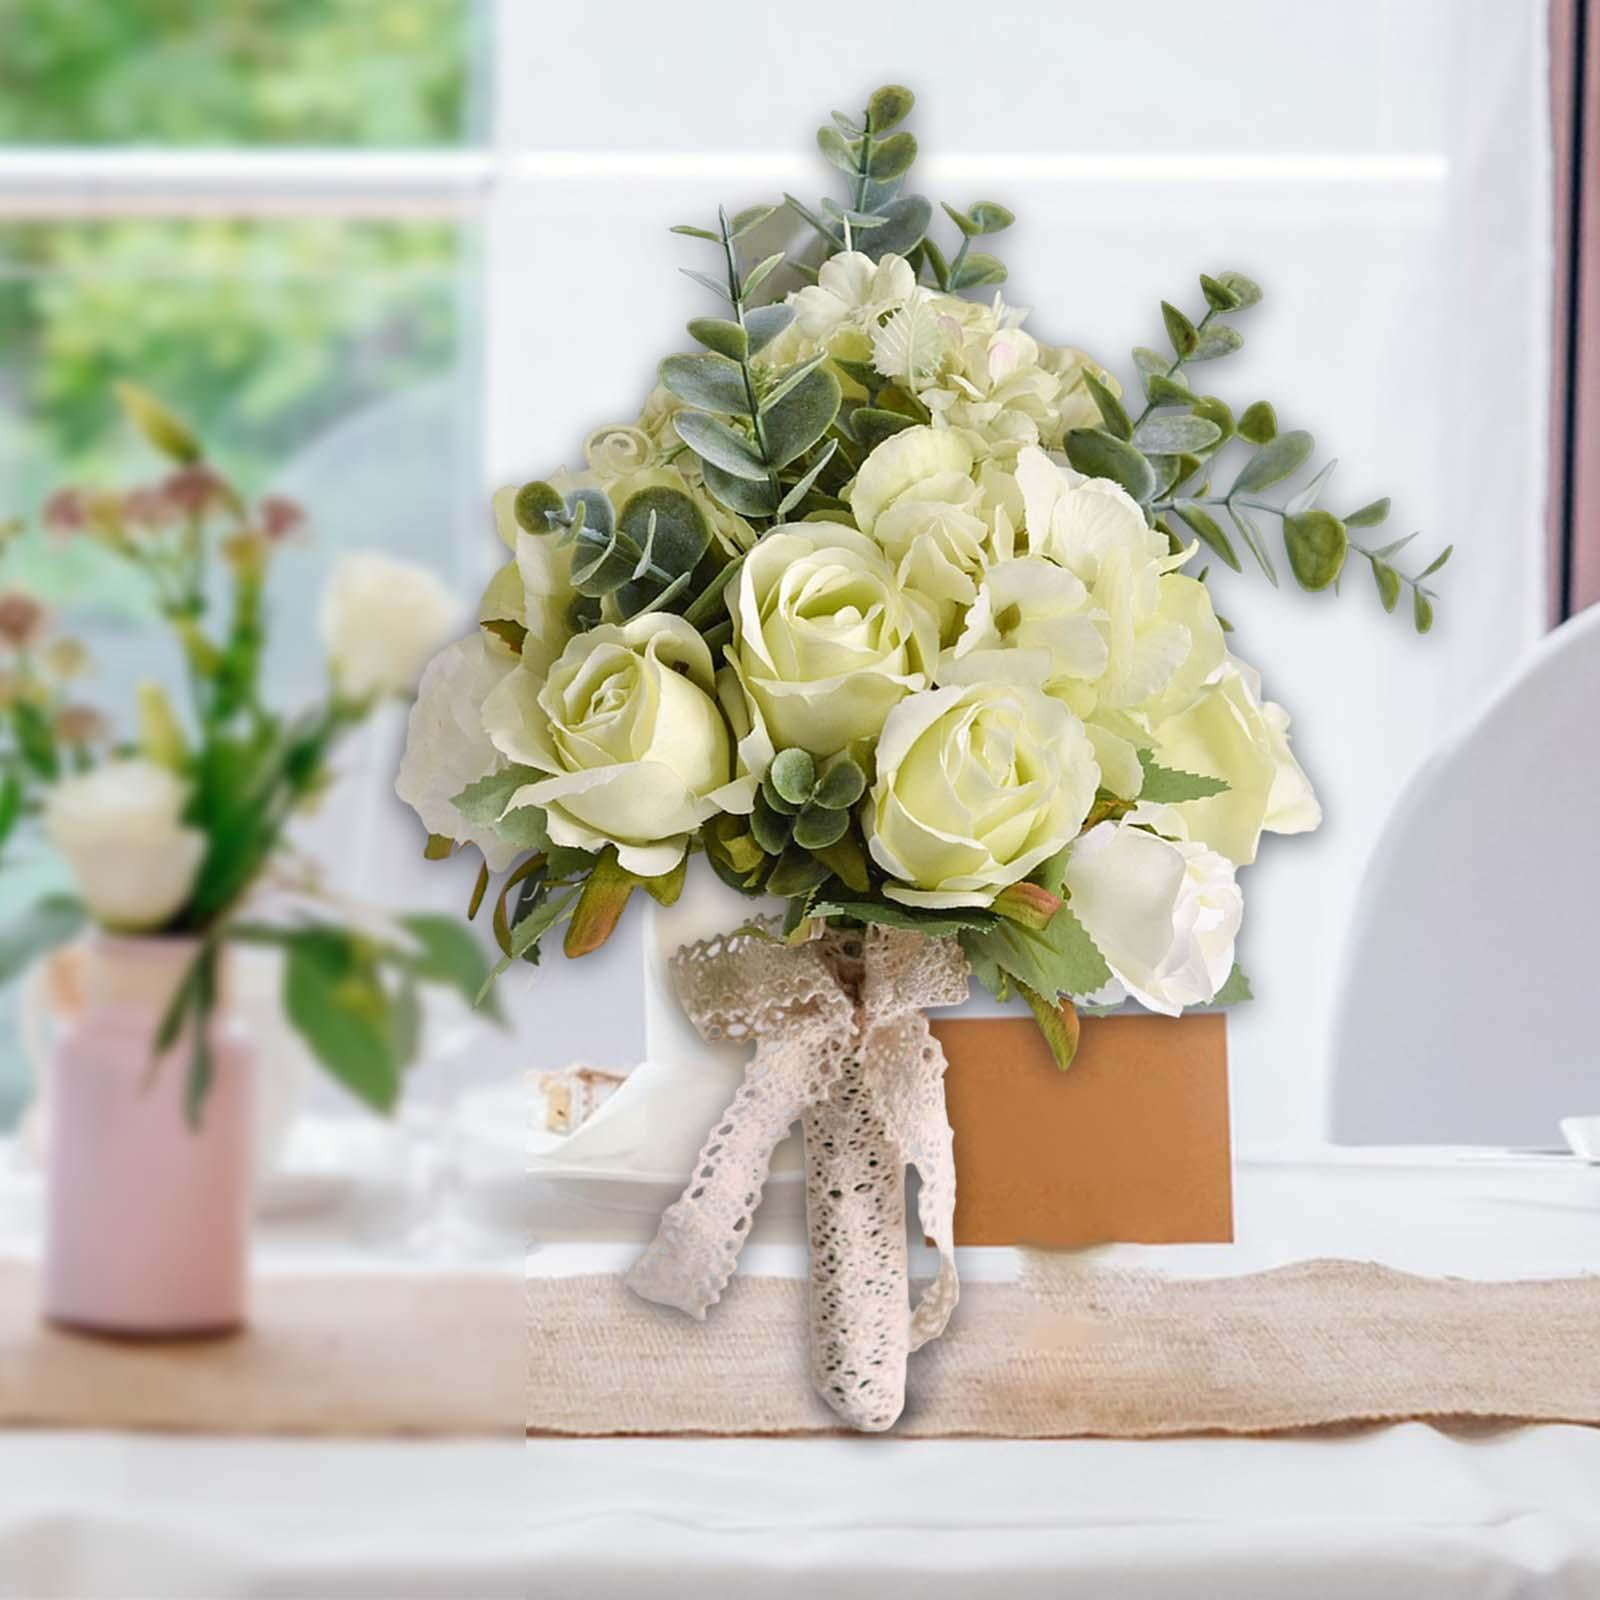 Natural Ivory And White Fake Flower Greenery Bouquet With Beads Perfect For  Home Decor, Weddings, And Vase Bouquets X0629 From Sts_017, $9.89